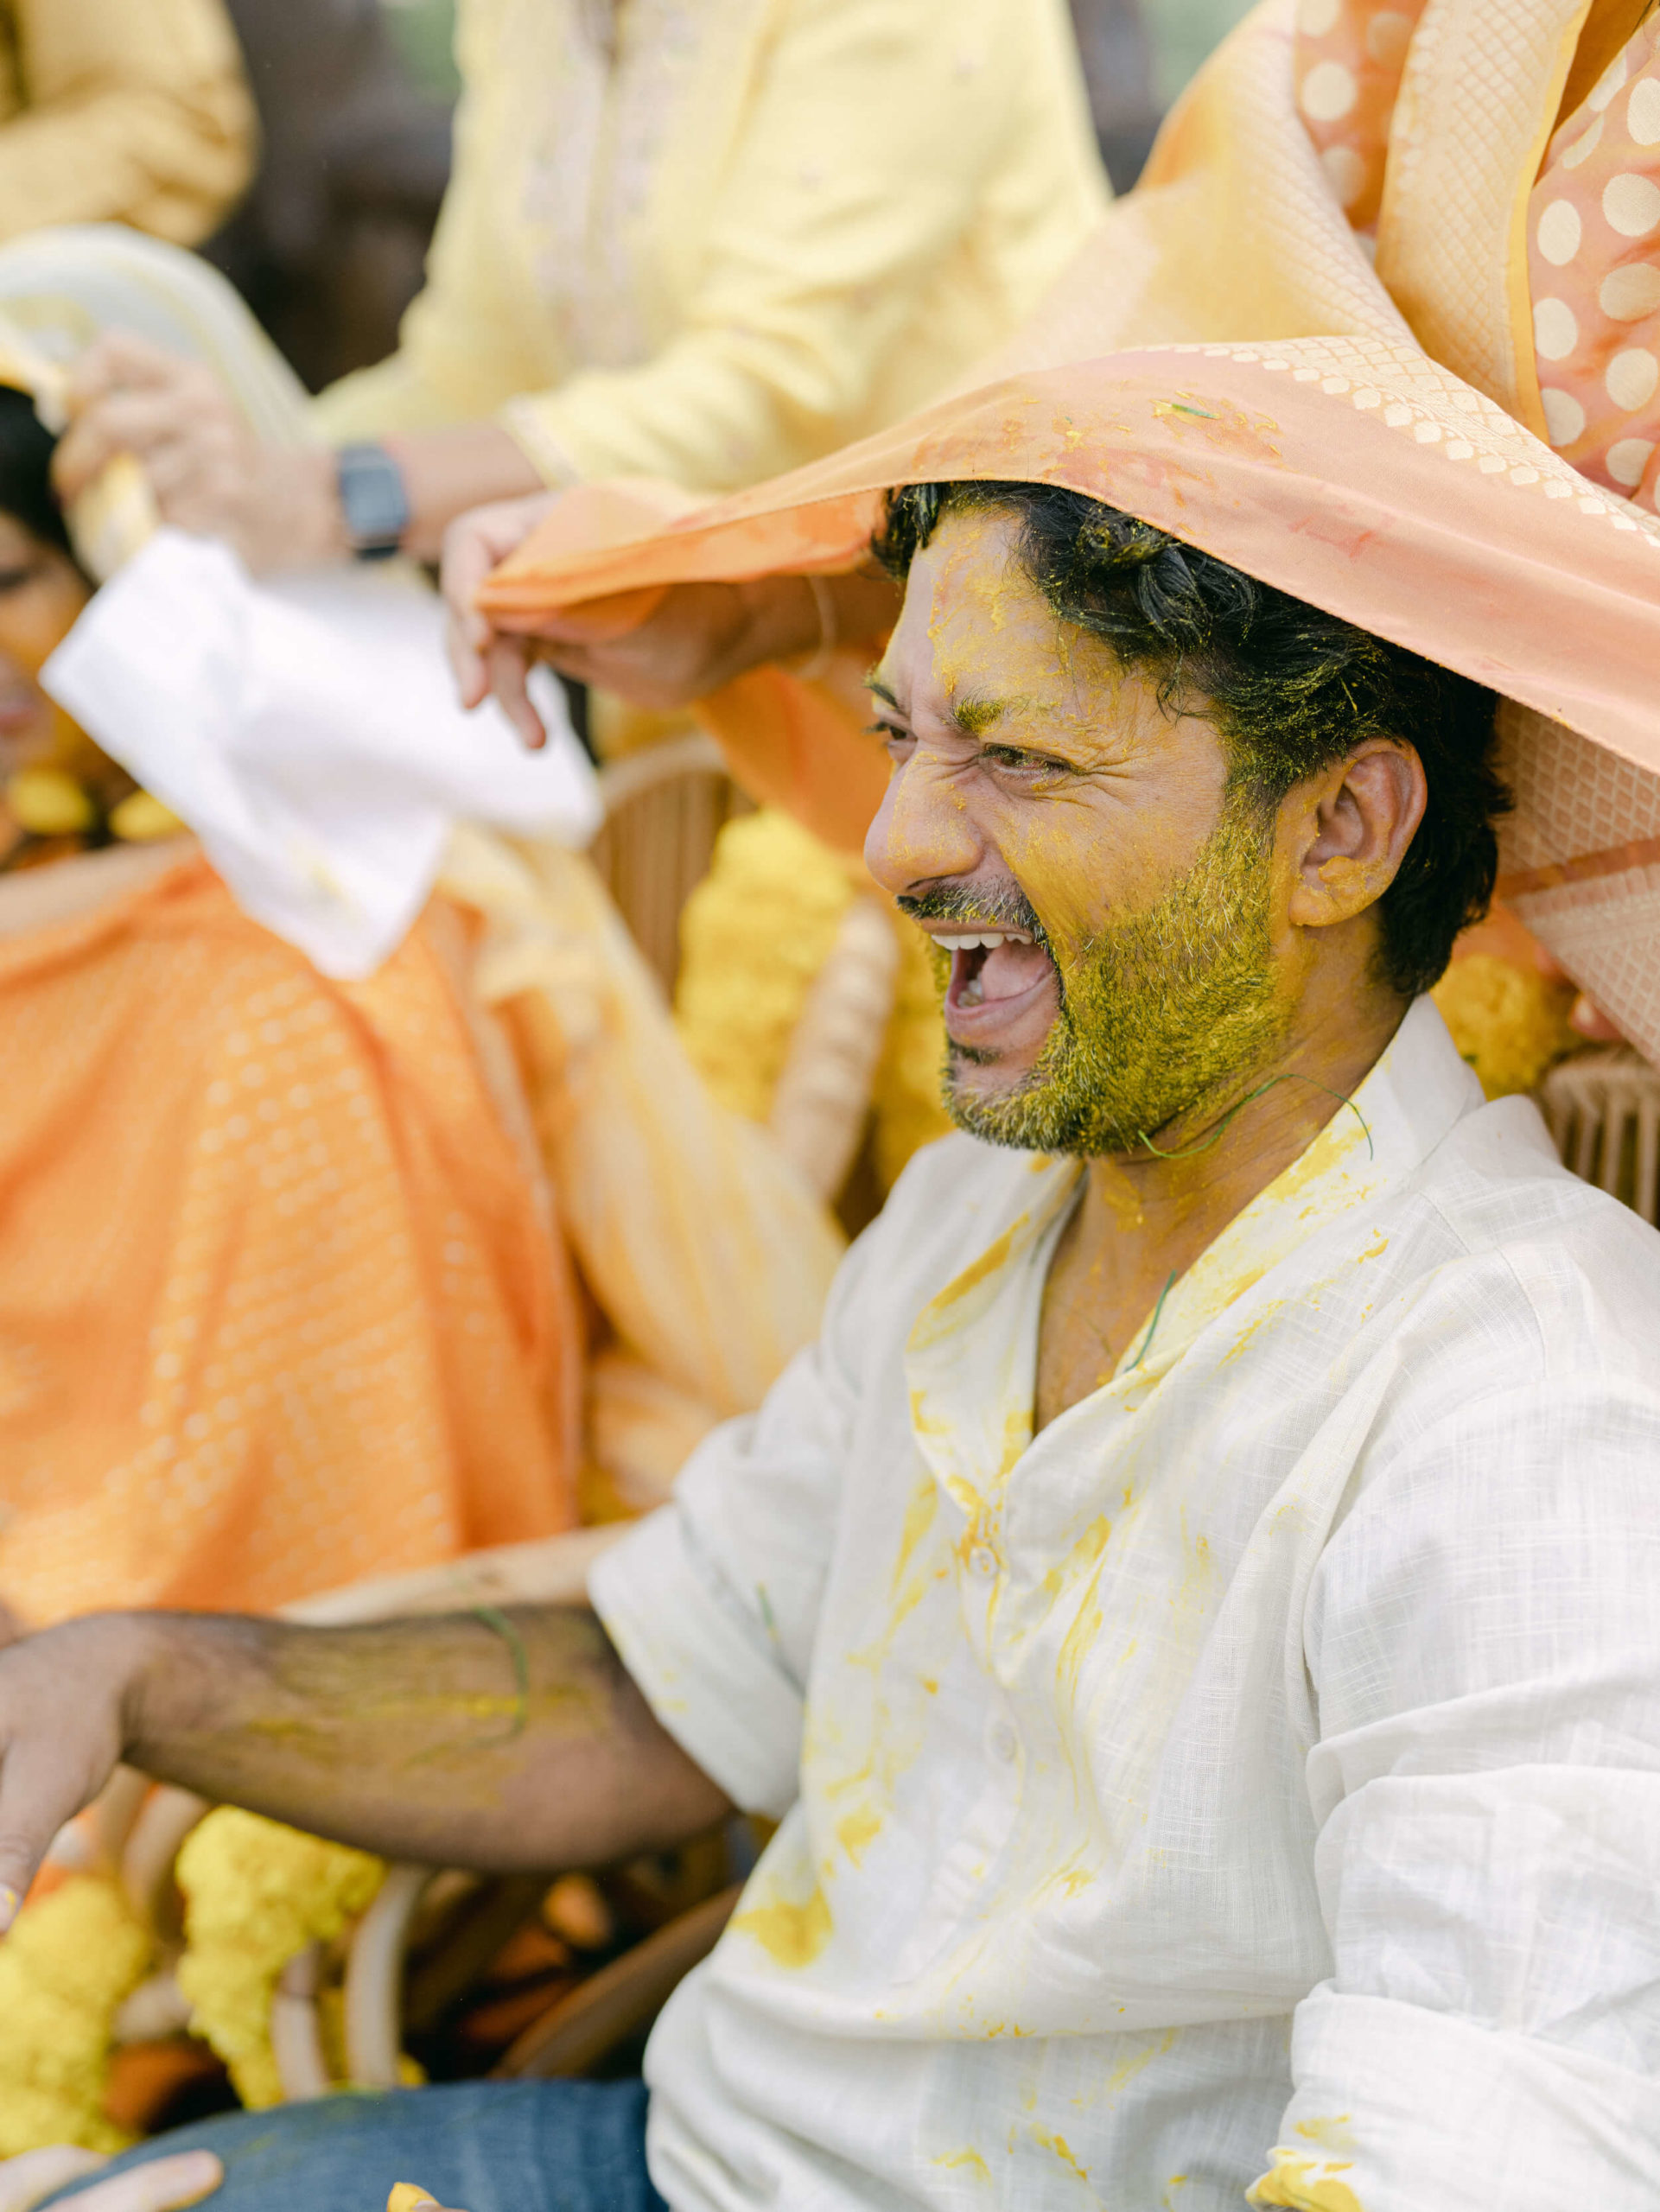 Ari covered in turmeric paste at Haldi ceremony: an Indian wedding tradition